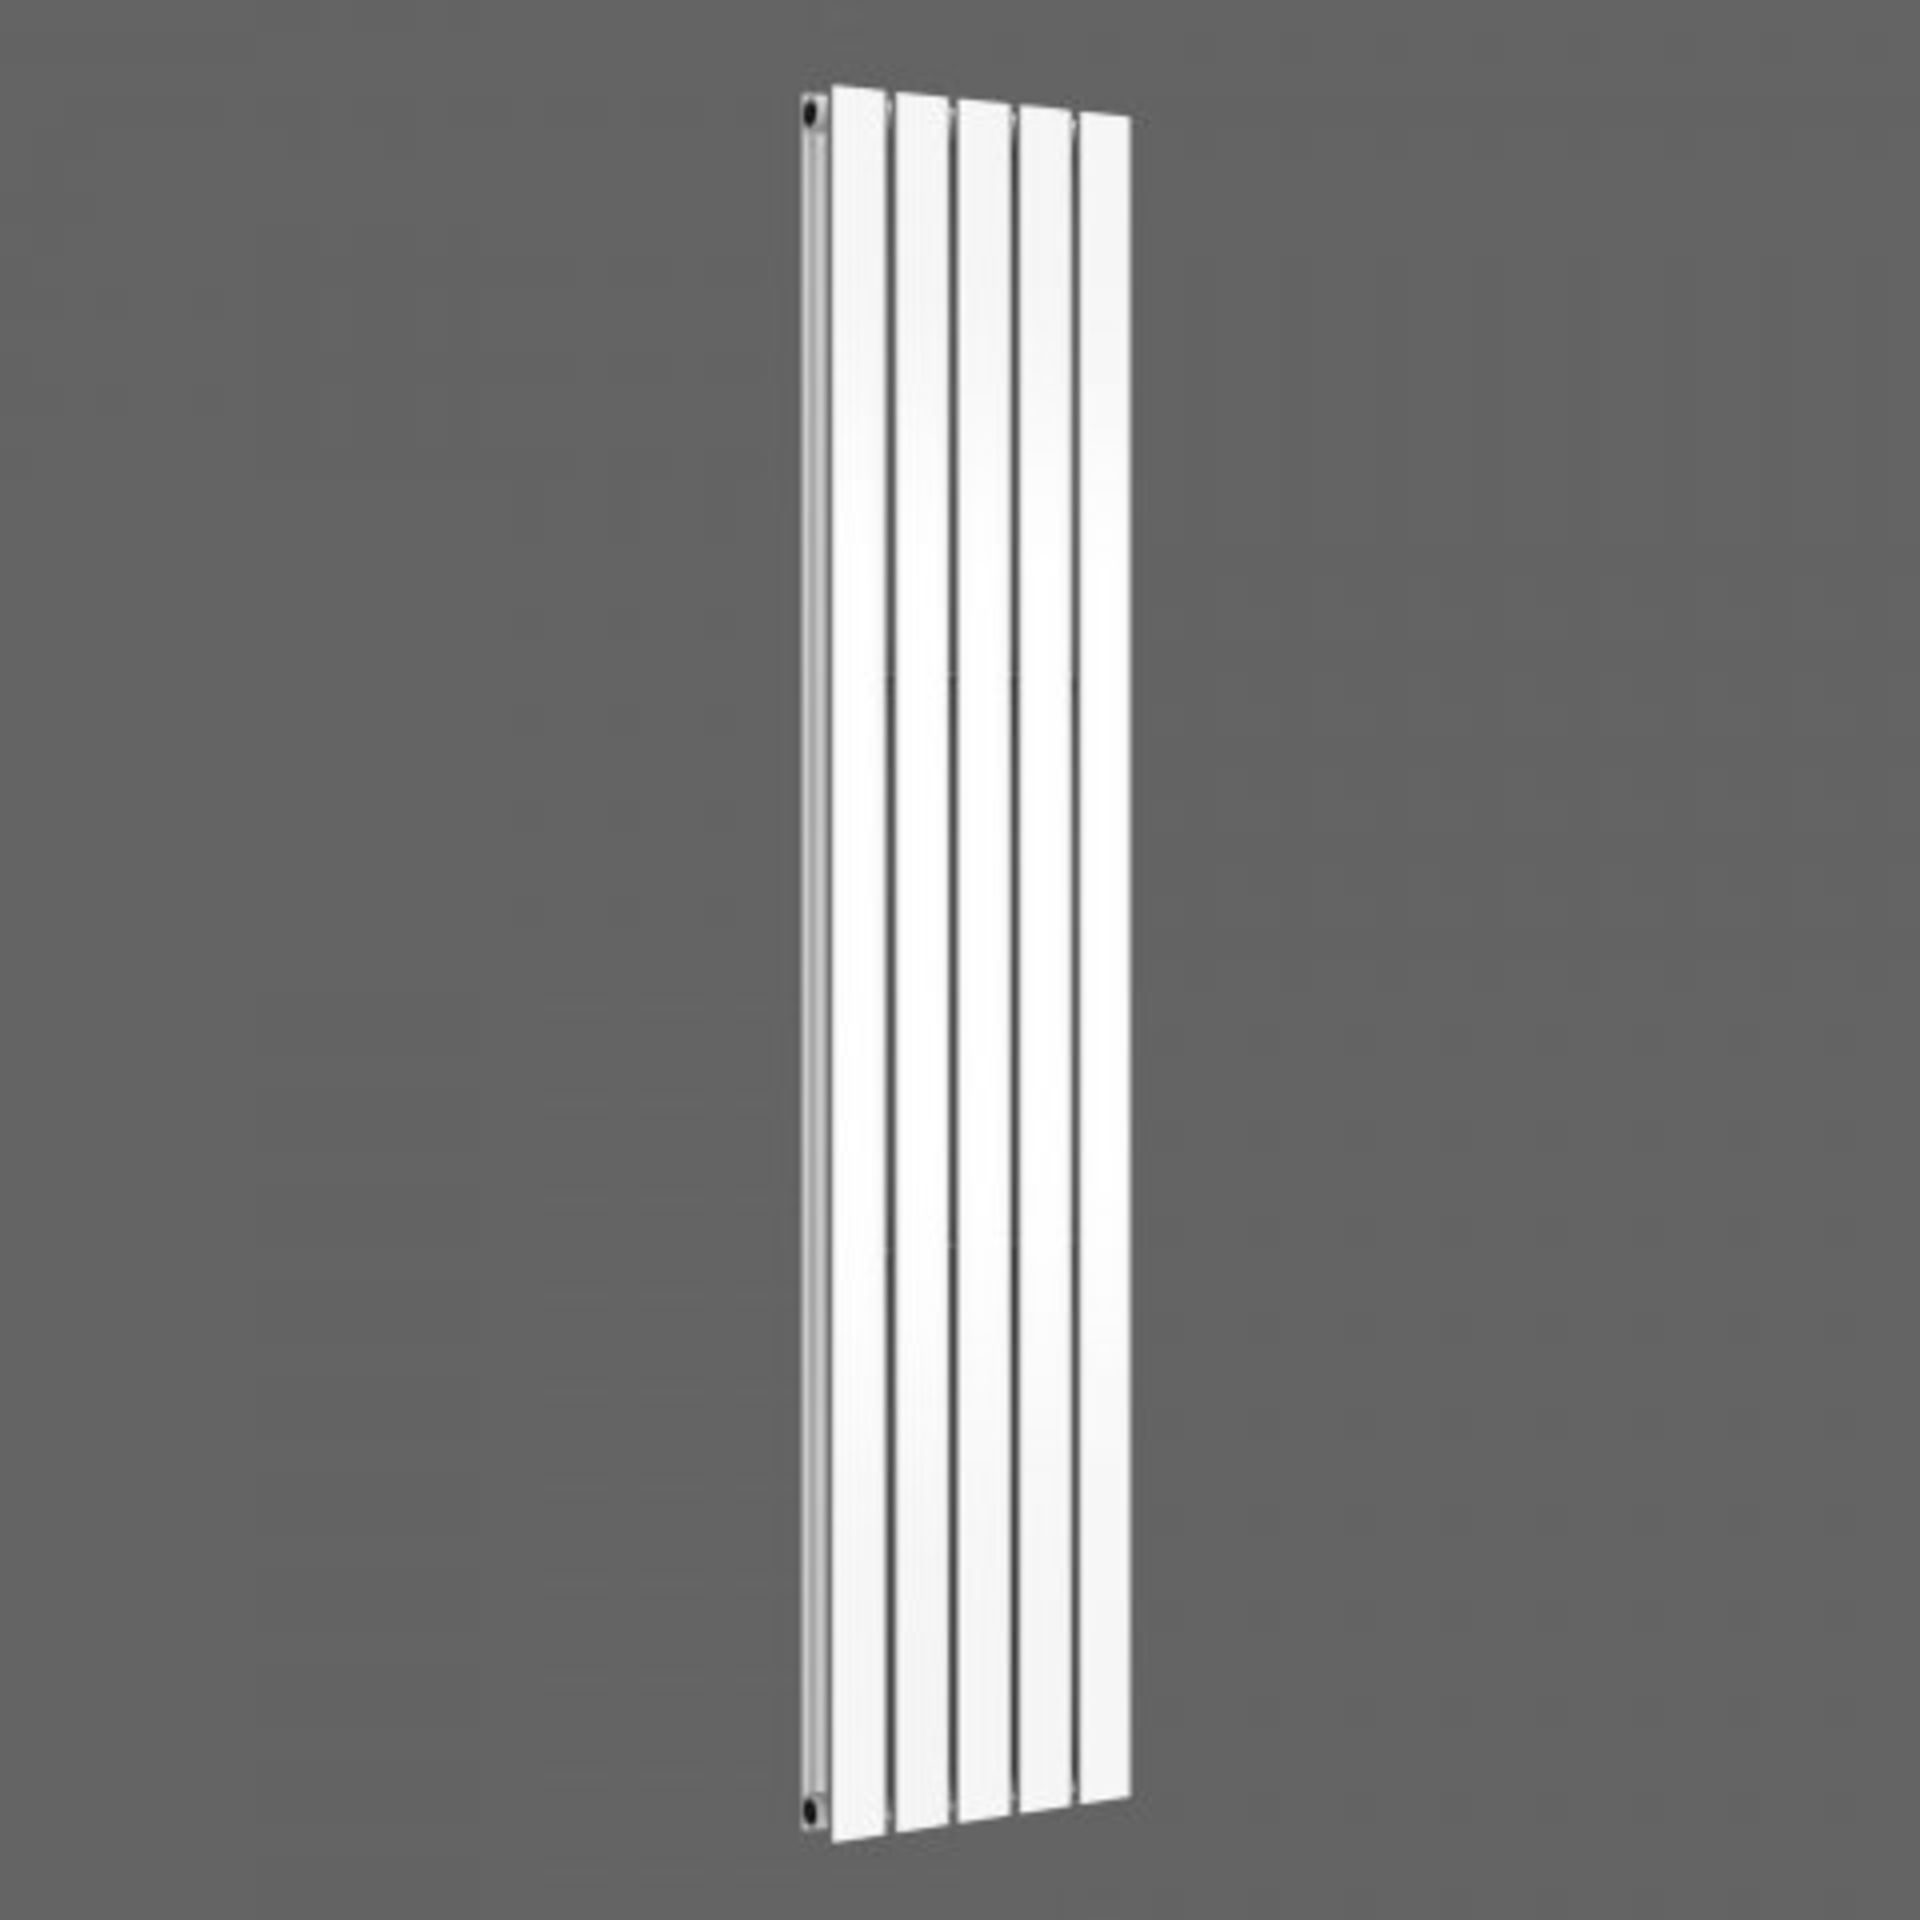 (W69) 1800x376mm Gloss White Double Flat Panel Vertical Radiator RRP £449.99 Designer Touch Ultra- - Image 2 of 2